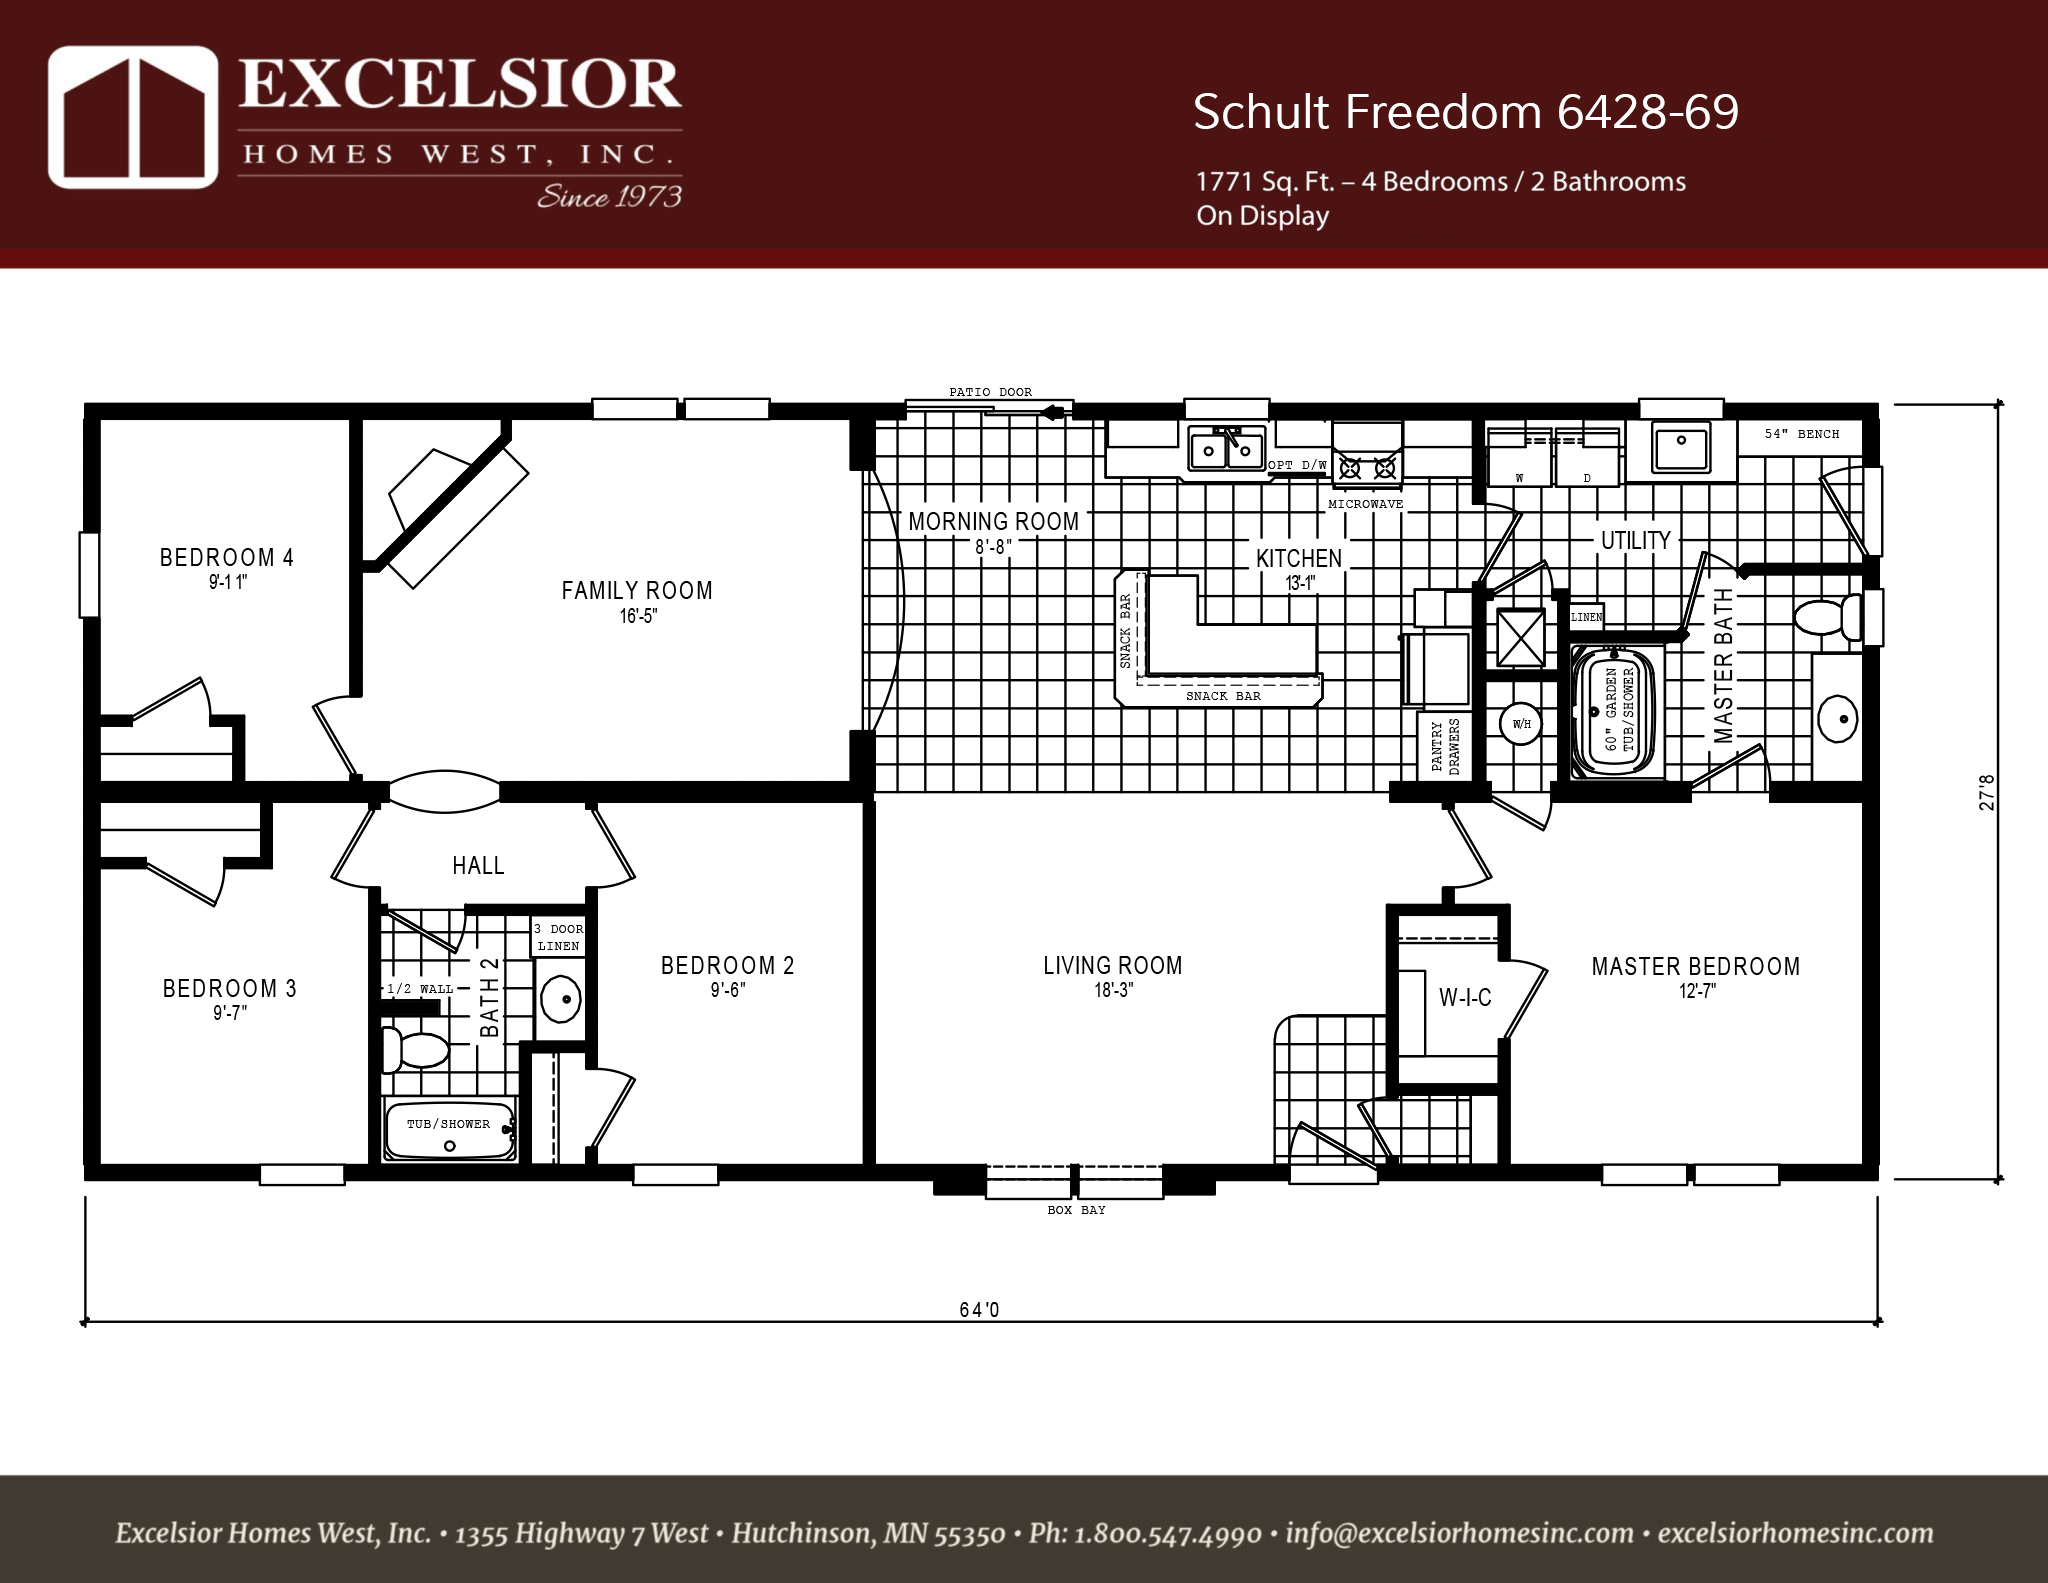 Schult Freedom 69 Modular/Manufactured Excelsior Homes